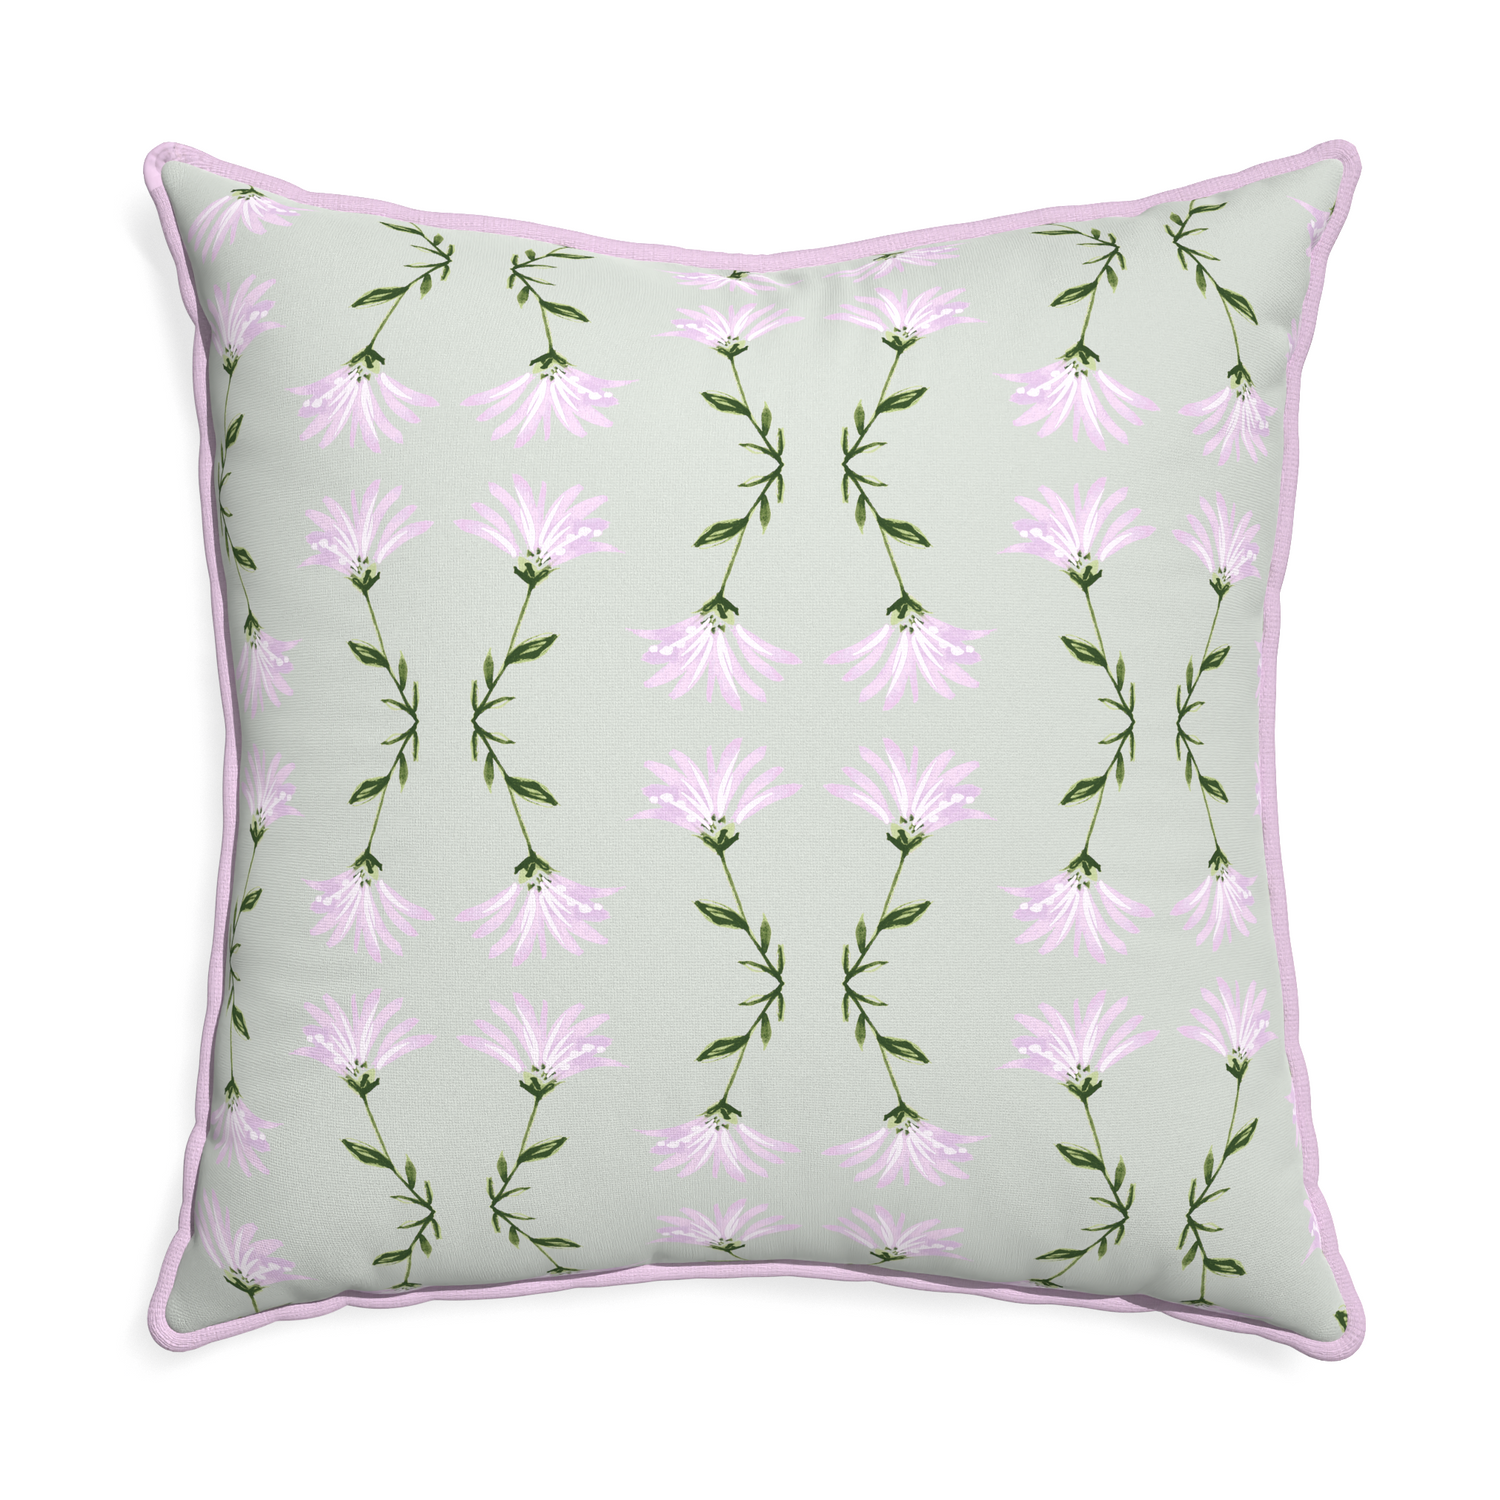 Euro-sham marina sage custom pillow with l piping on white background